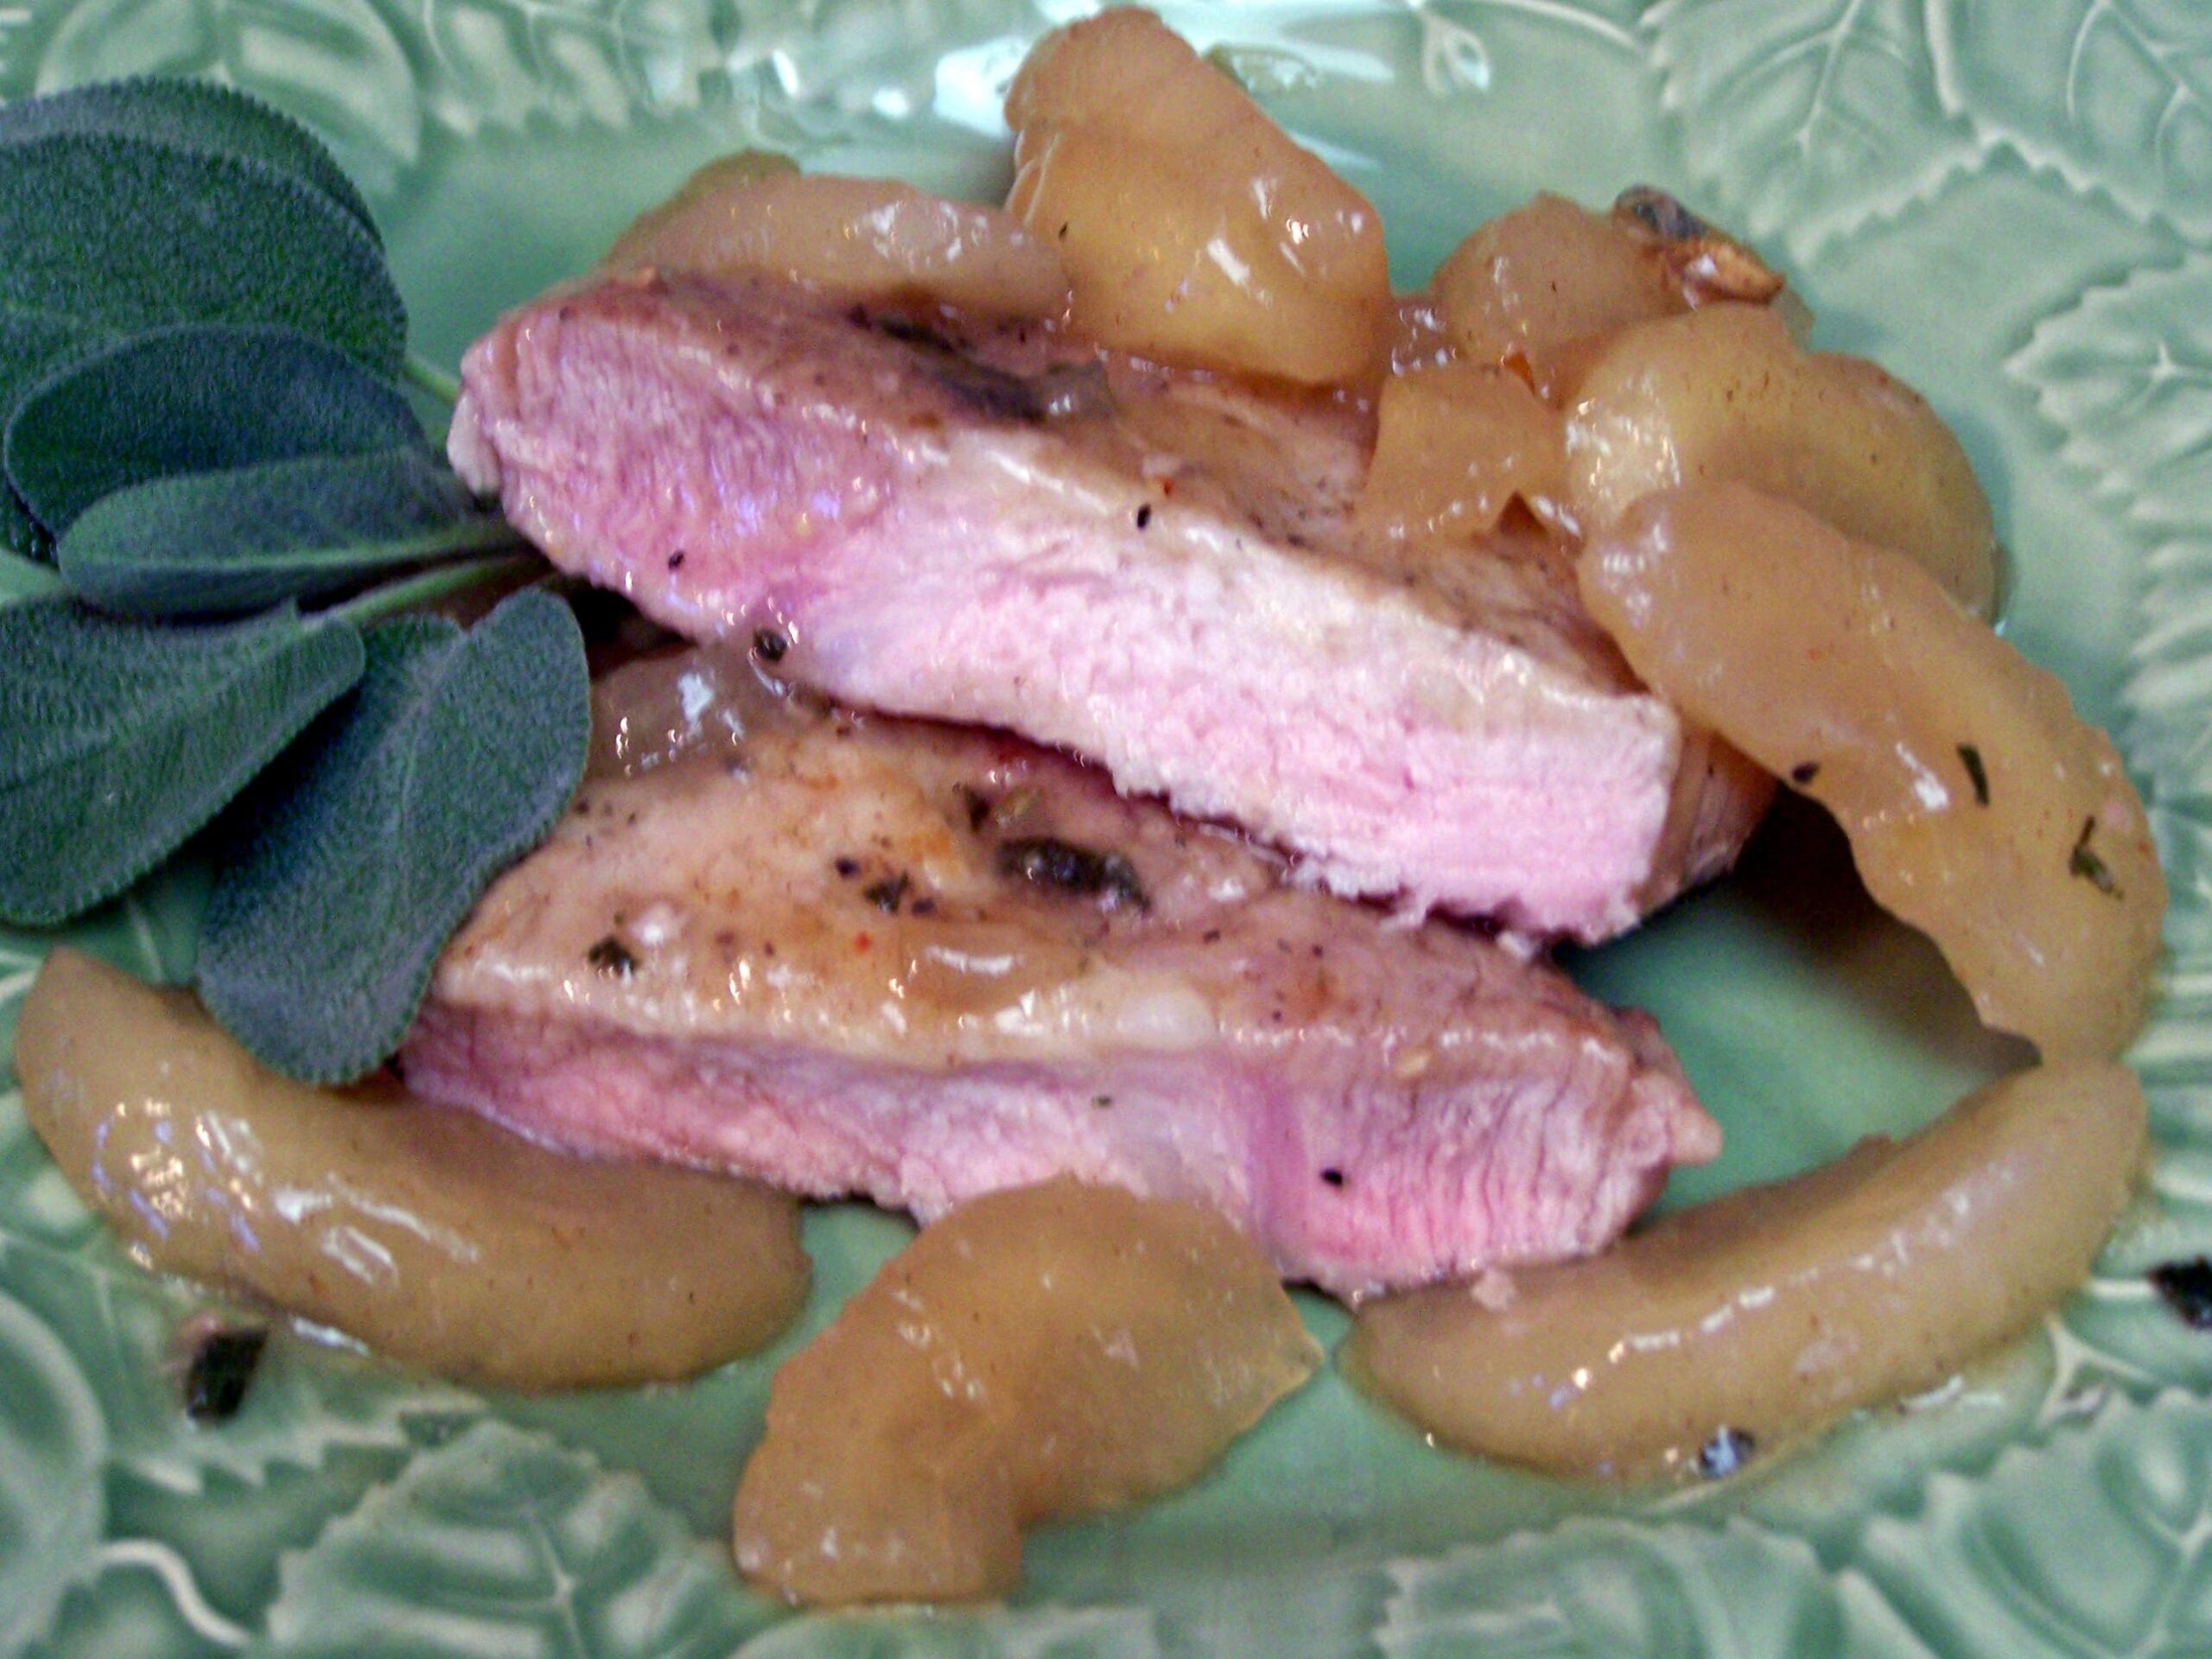  Sizzling, juicy pork chops smothered in a sweet cinnamon apple sauce.